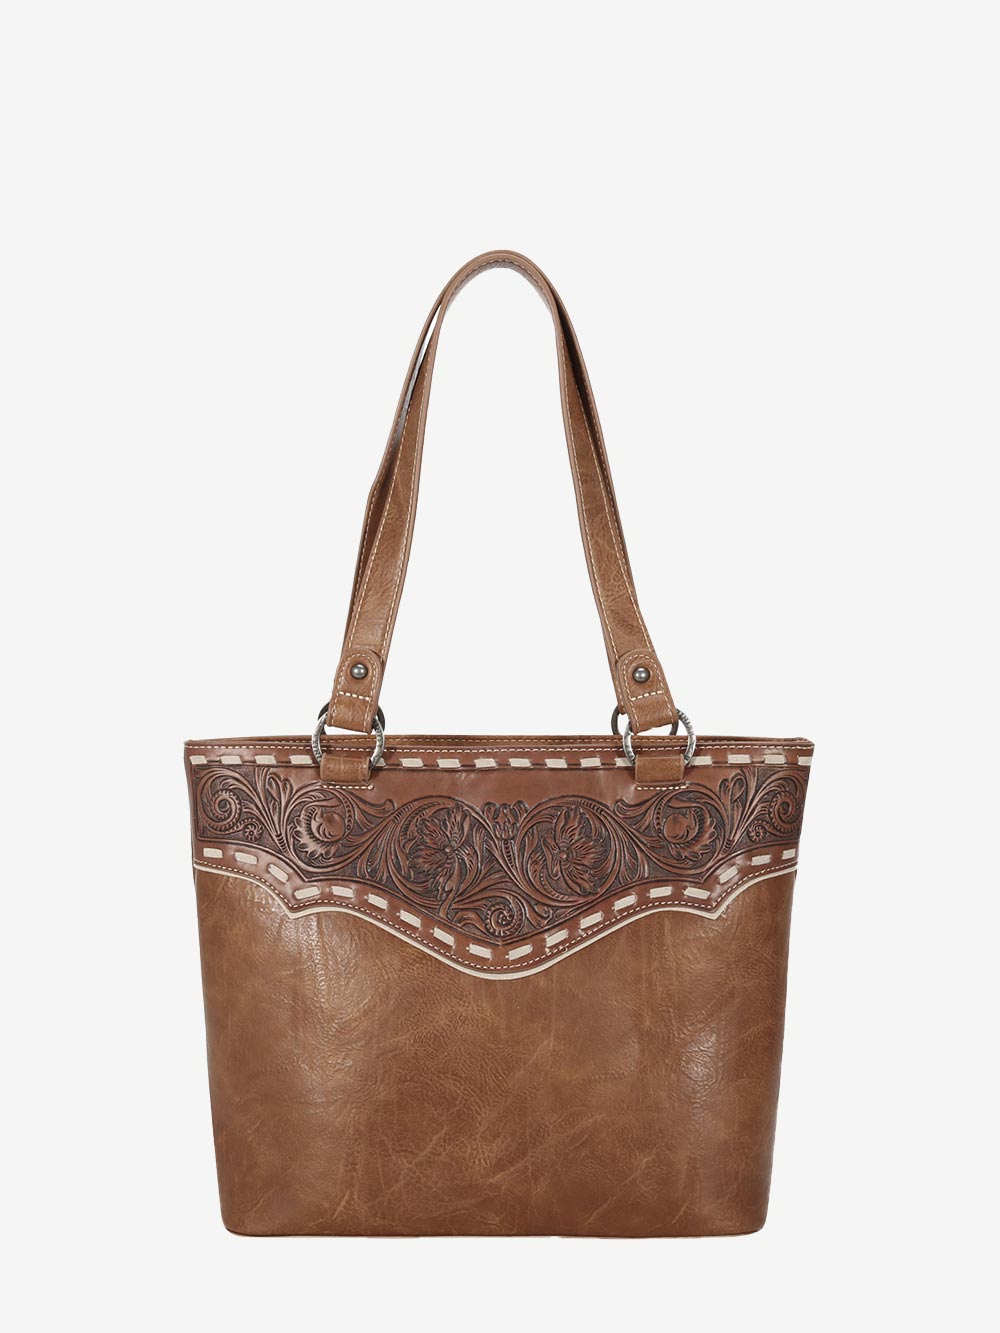 Trinity Ranch Floral Tooled Concealed Carry Tote Bag - Montana West World